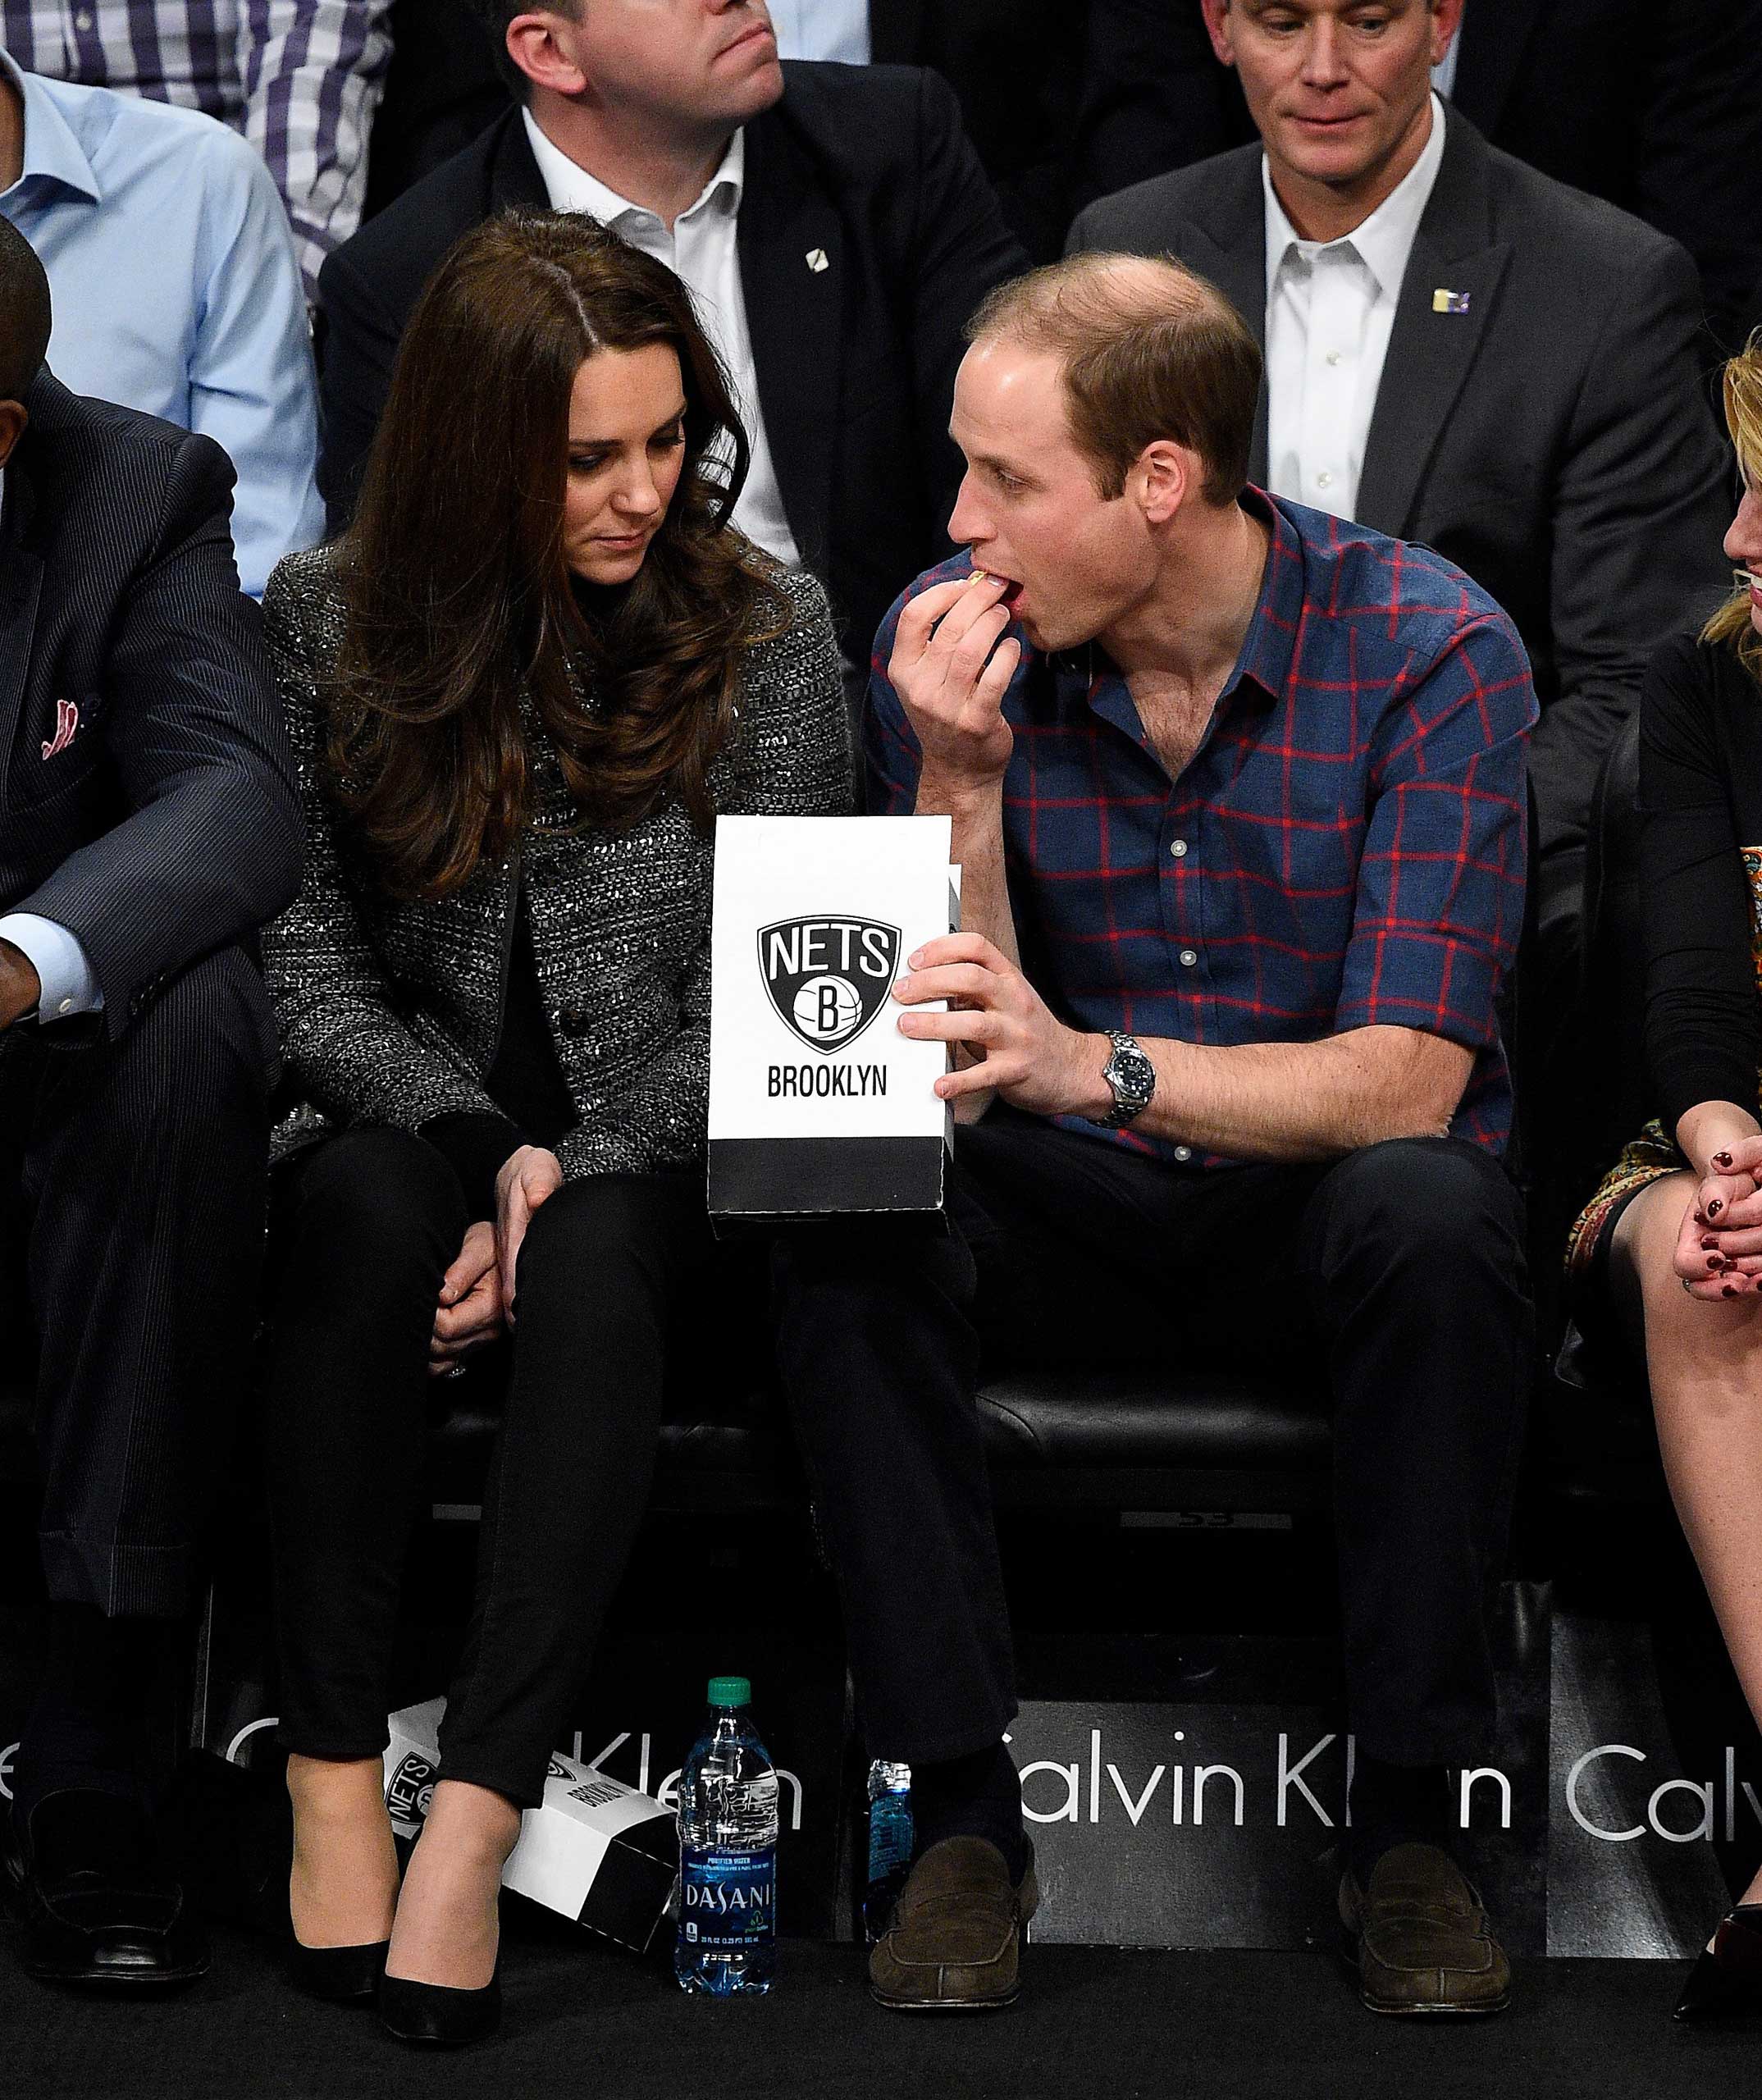 PRINCE WILLIAM AND KATE, THE DUKE AND DUCHESS OF CAMBRIDGE ATTEND A BROOKLYN NETS GAME